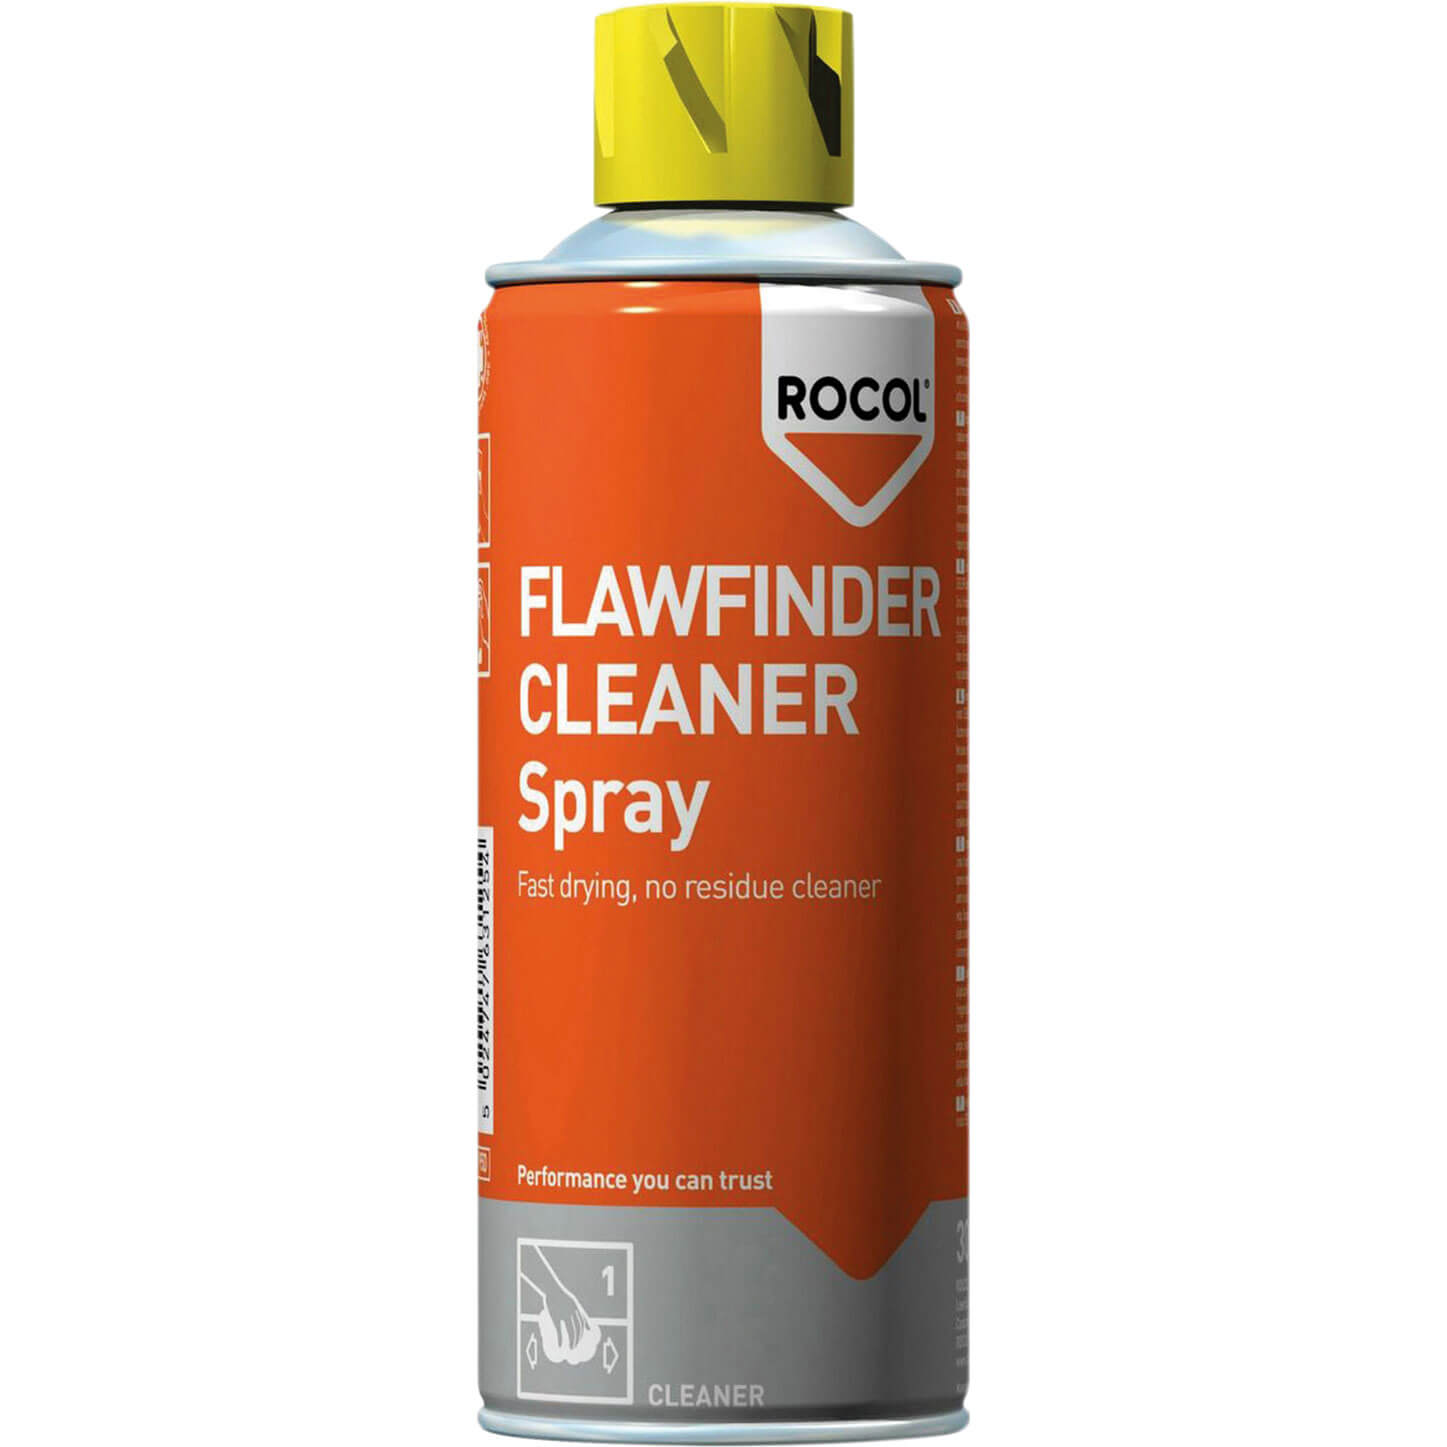 Image of Rocol Flaw finder Cleaner Spray 300ml